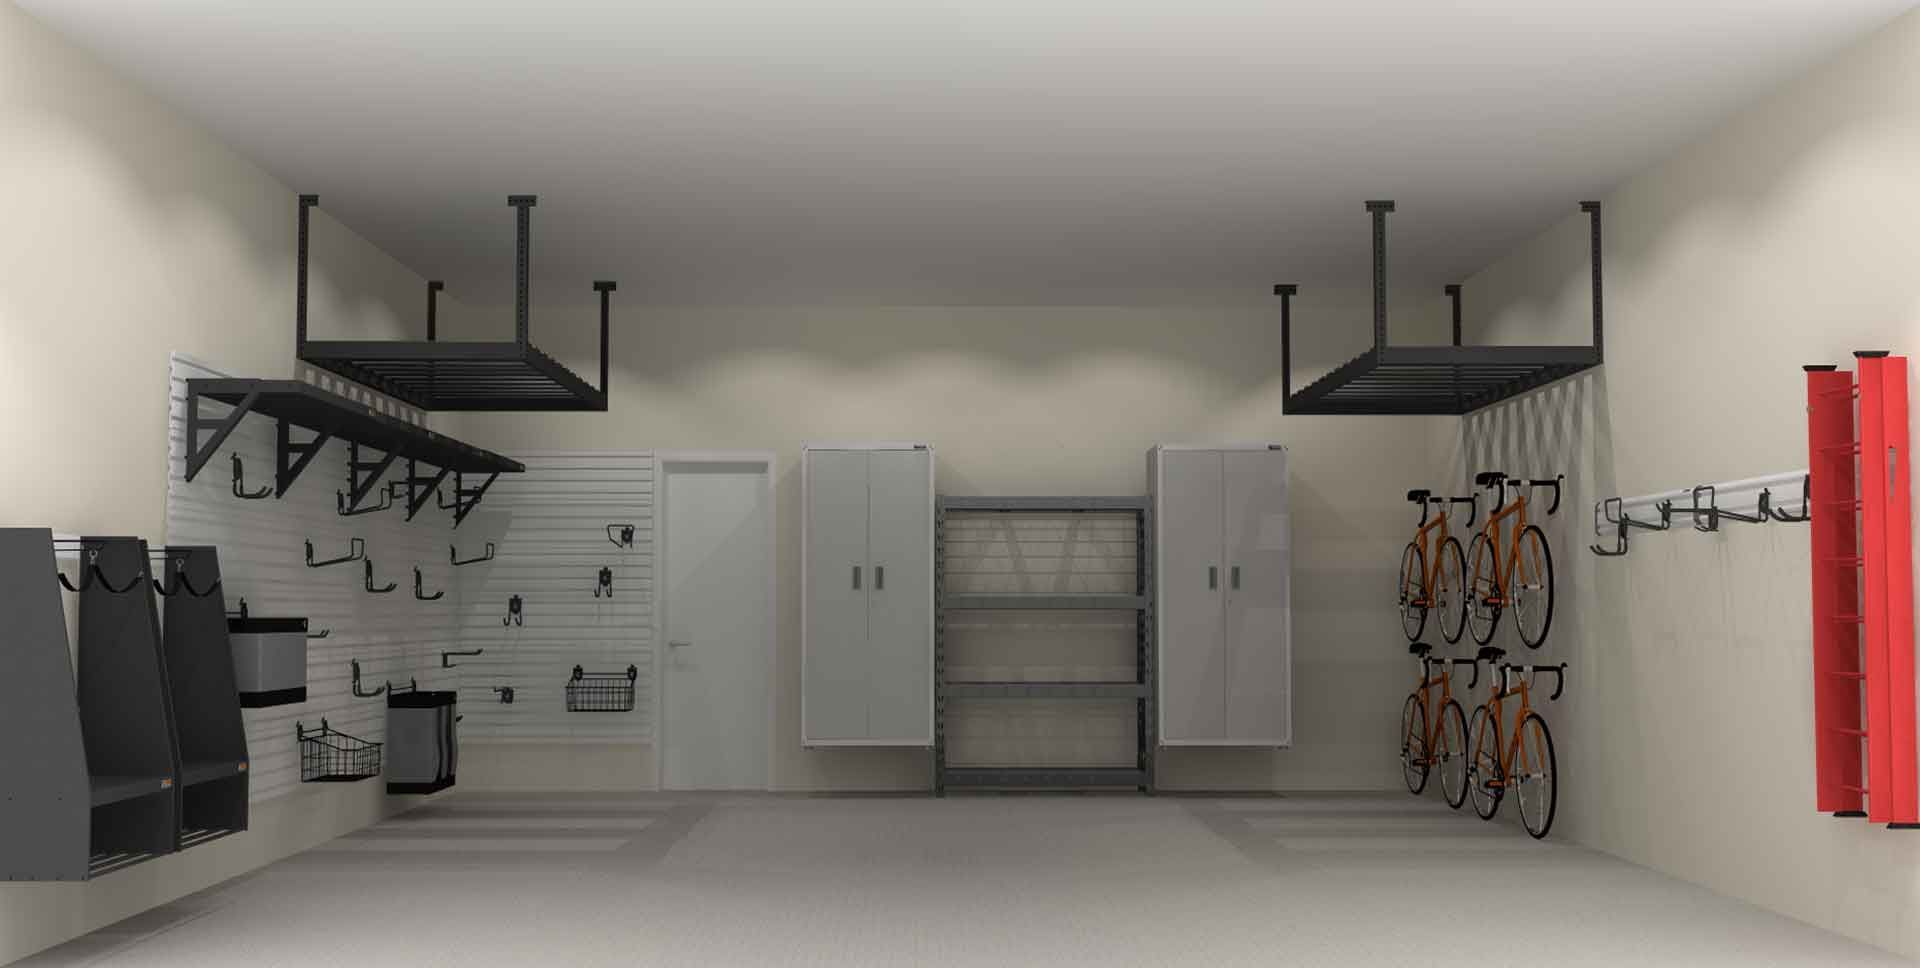 A rendering of a garage with bikes hanging from the ceiling.